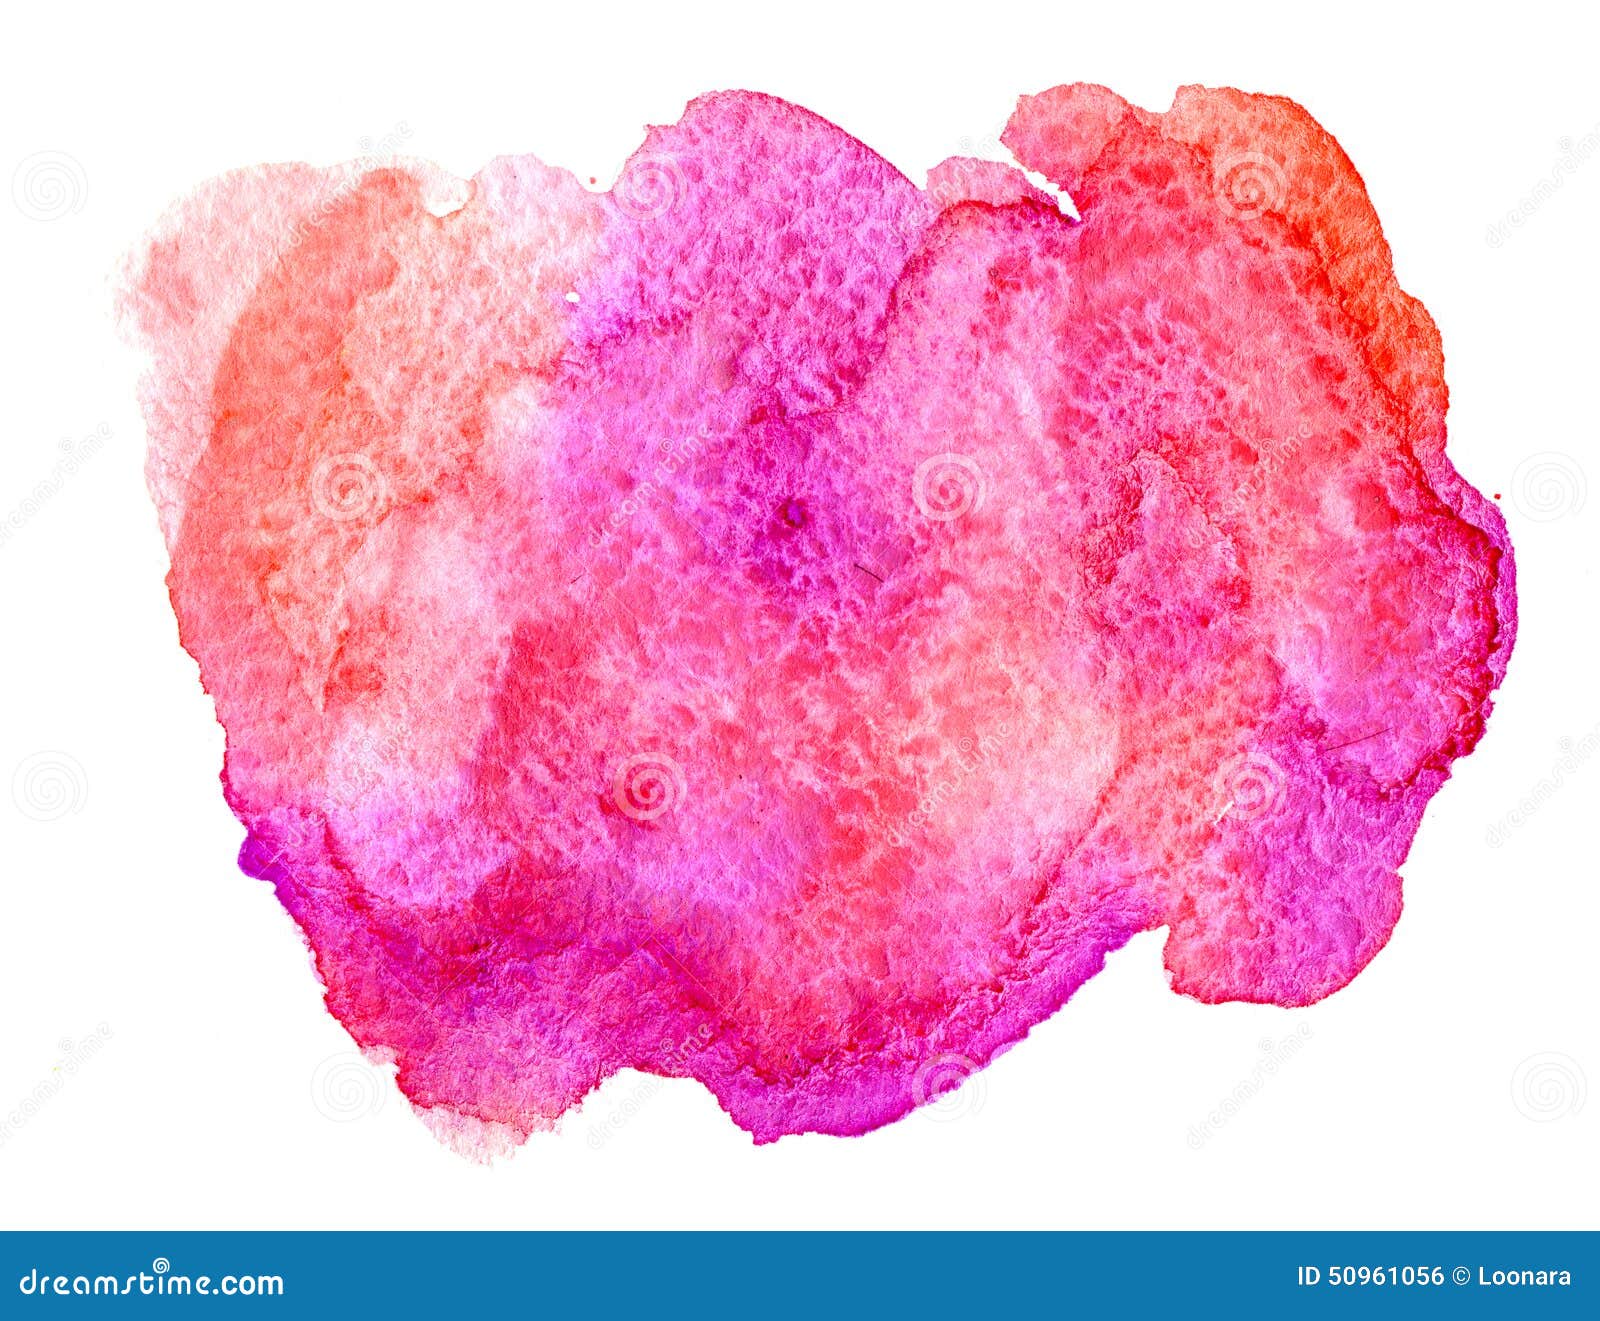 Pink and coral watercolor stock photo. Image of drawing ...